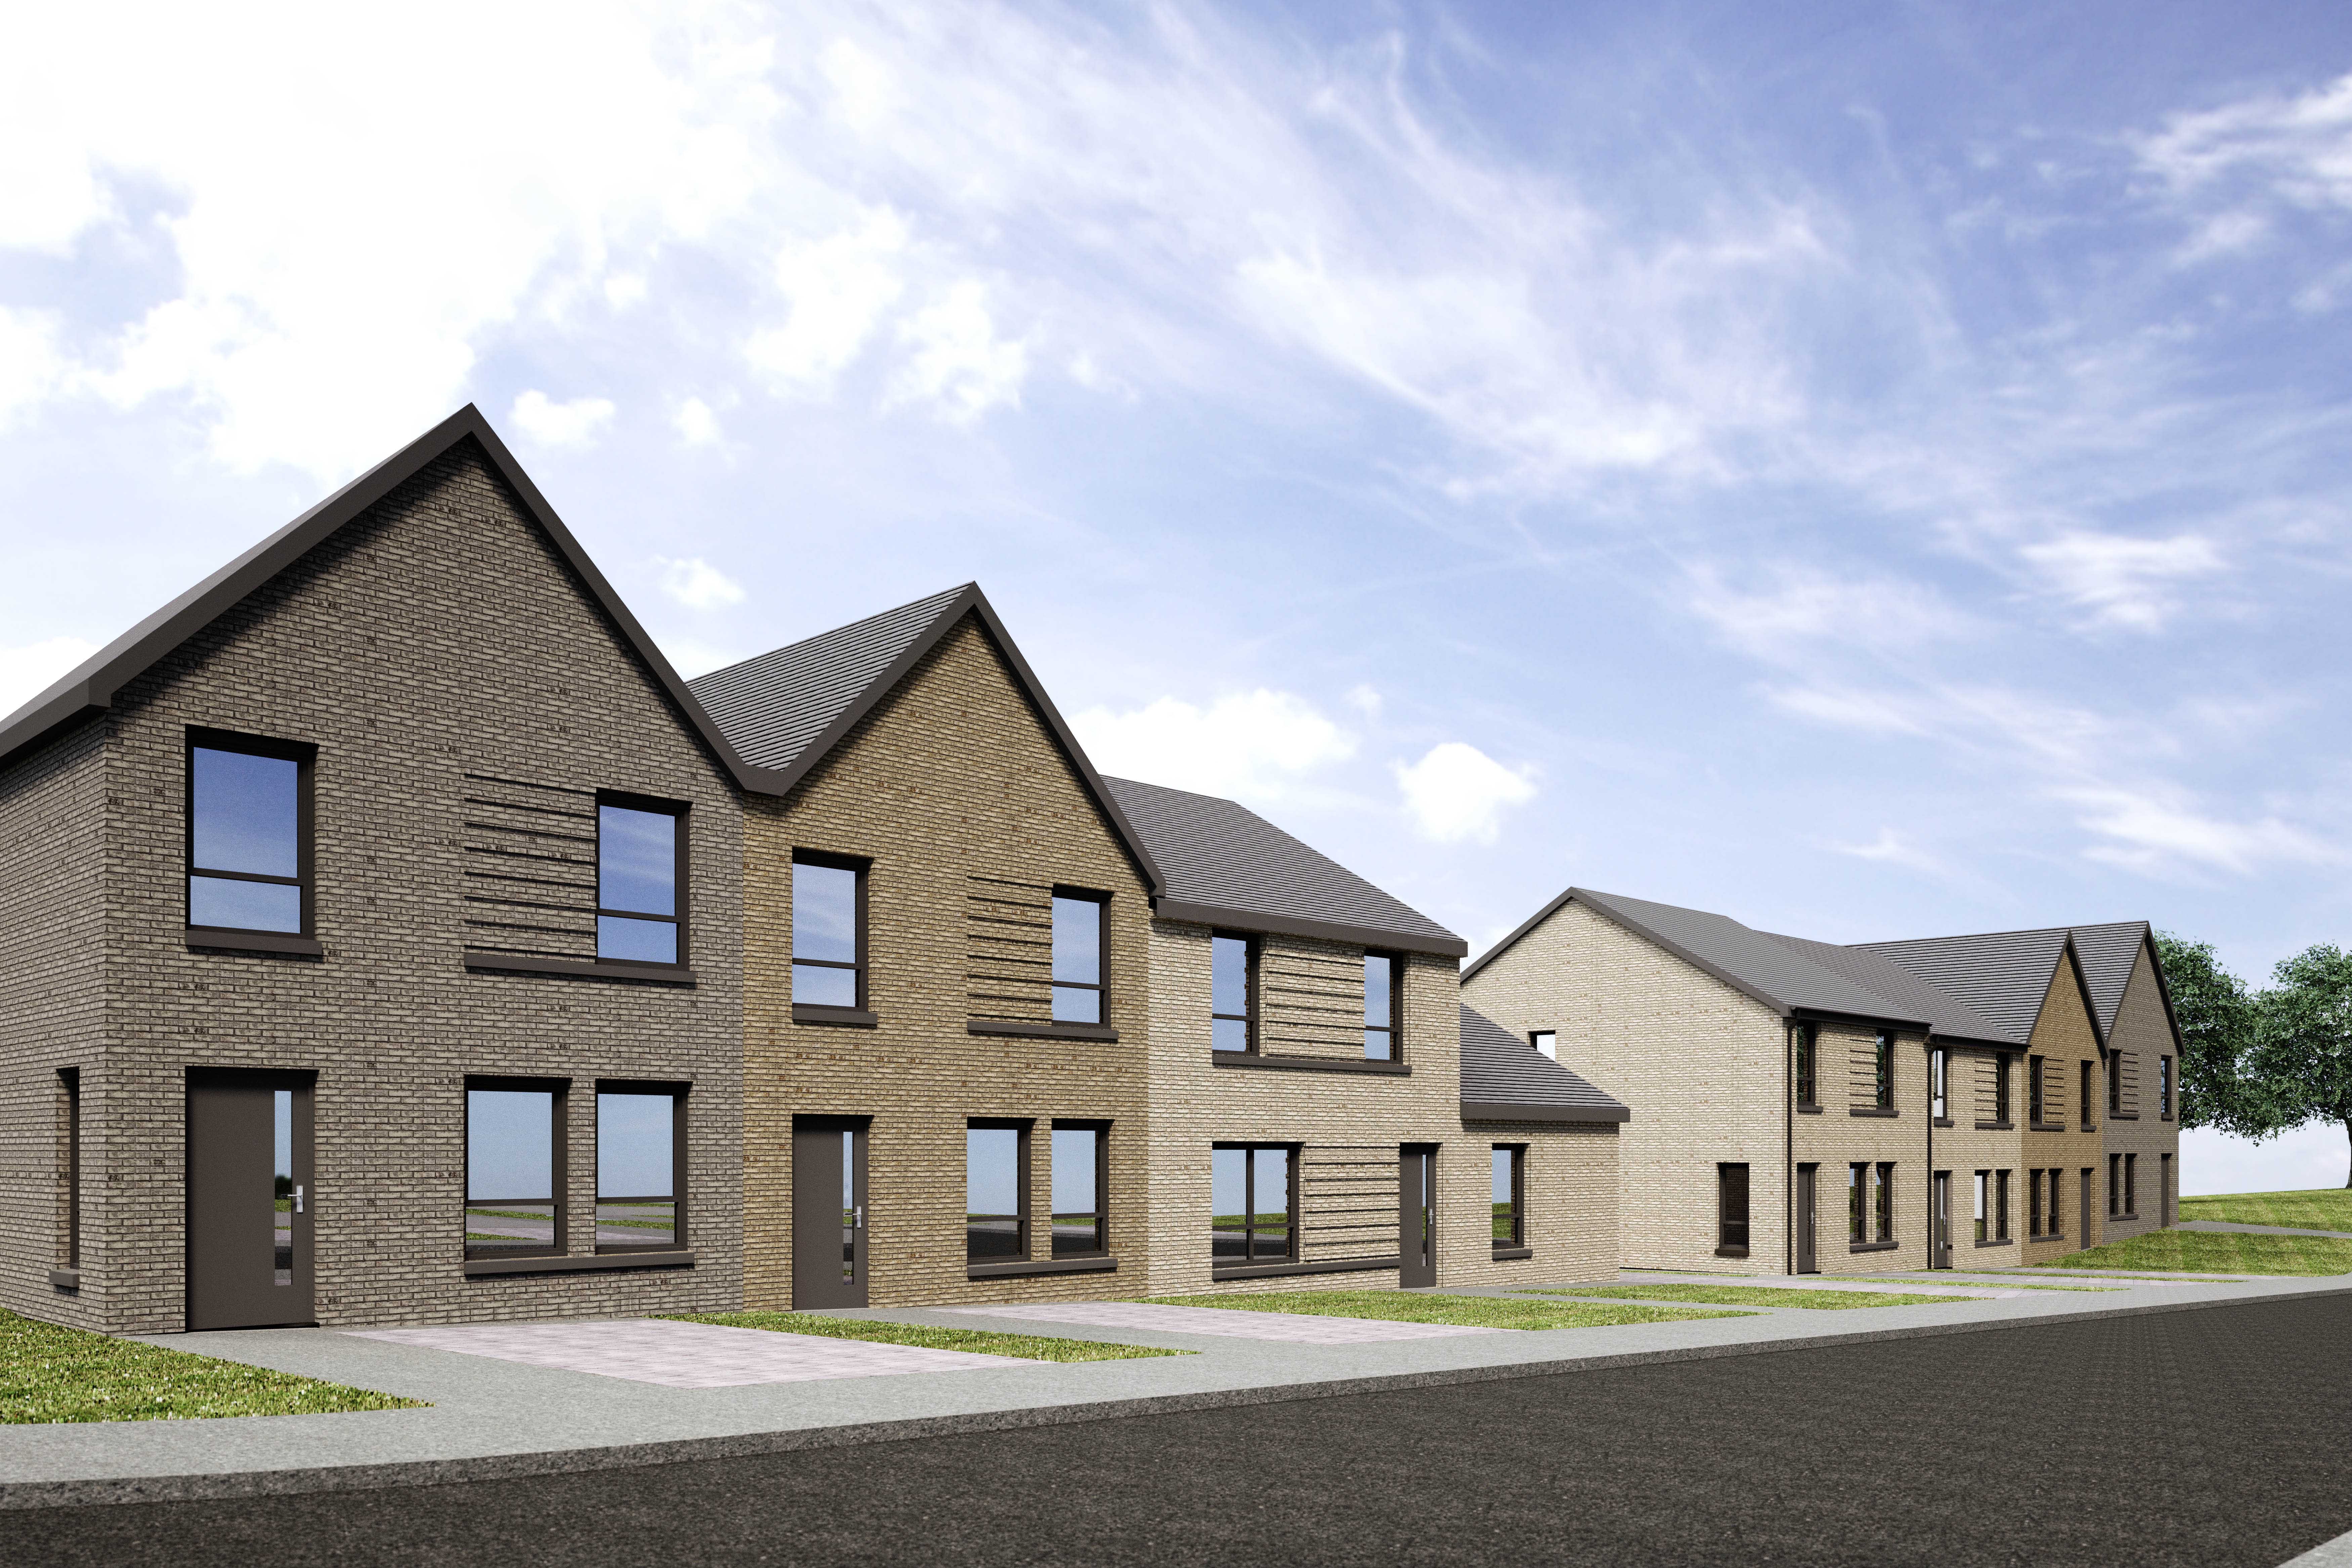 Oak Tree starts ‘significant’ £33m new build programme